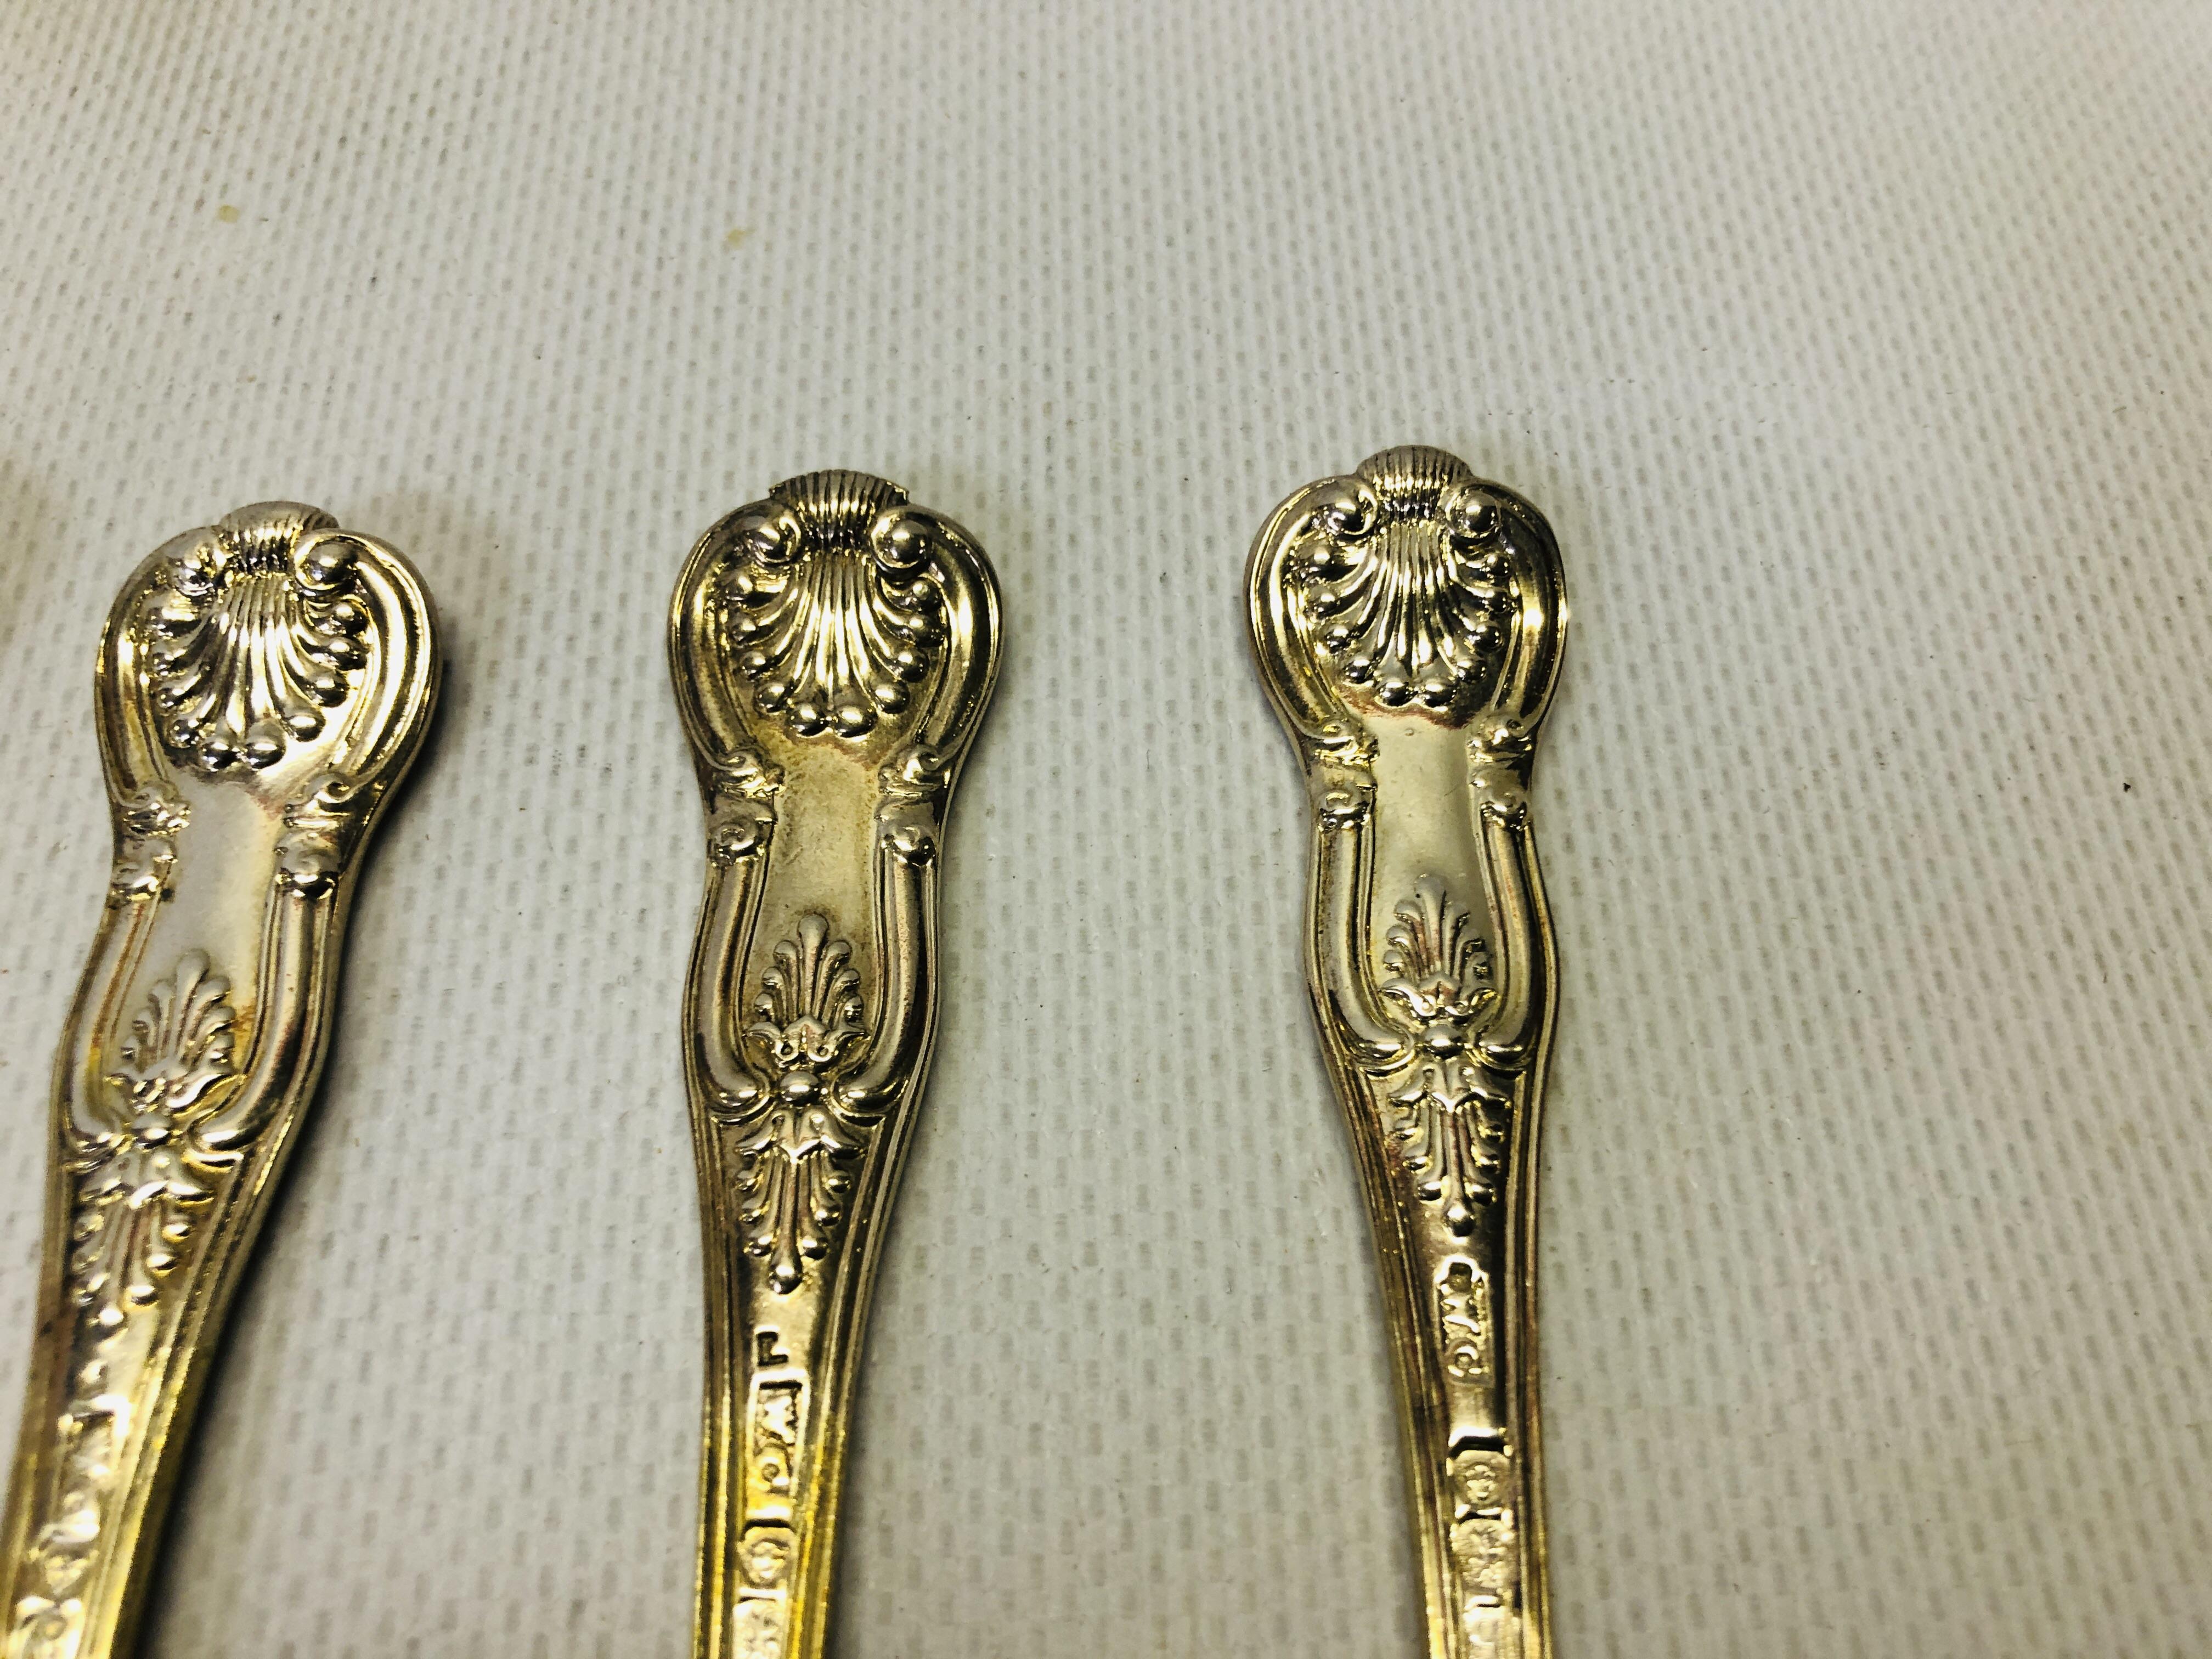 4 WILLIAM IV LARGE KING'S PATTERN SILVER TEASPOONS, W. - Image 8 of 12